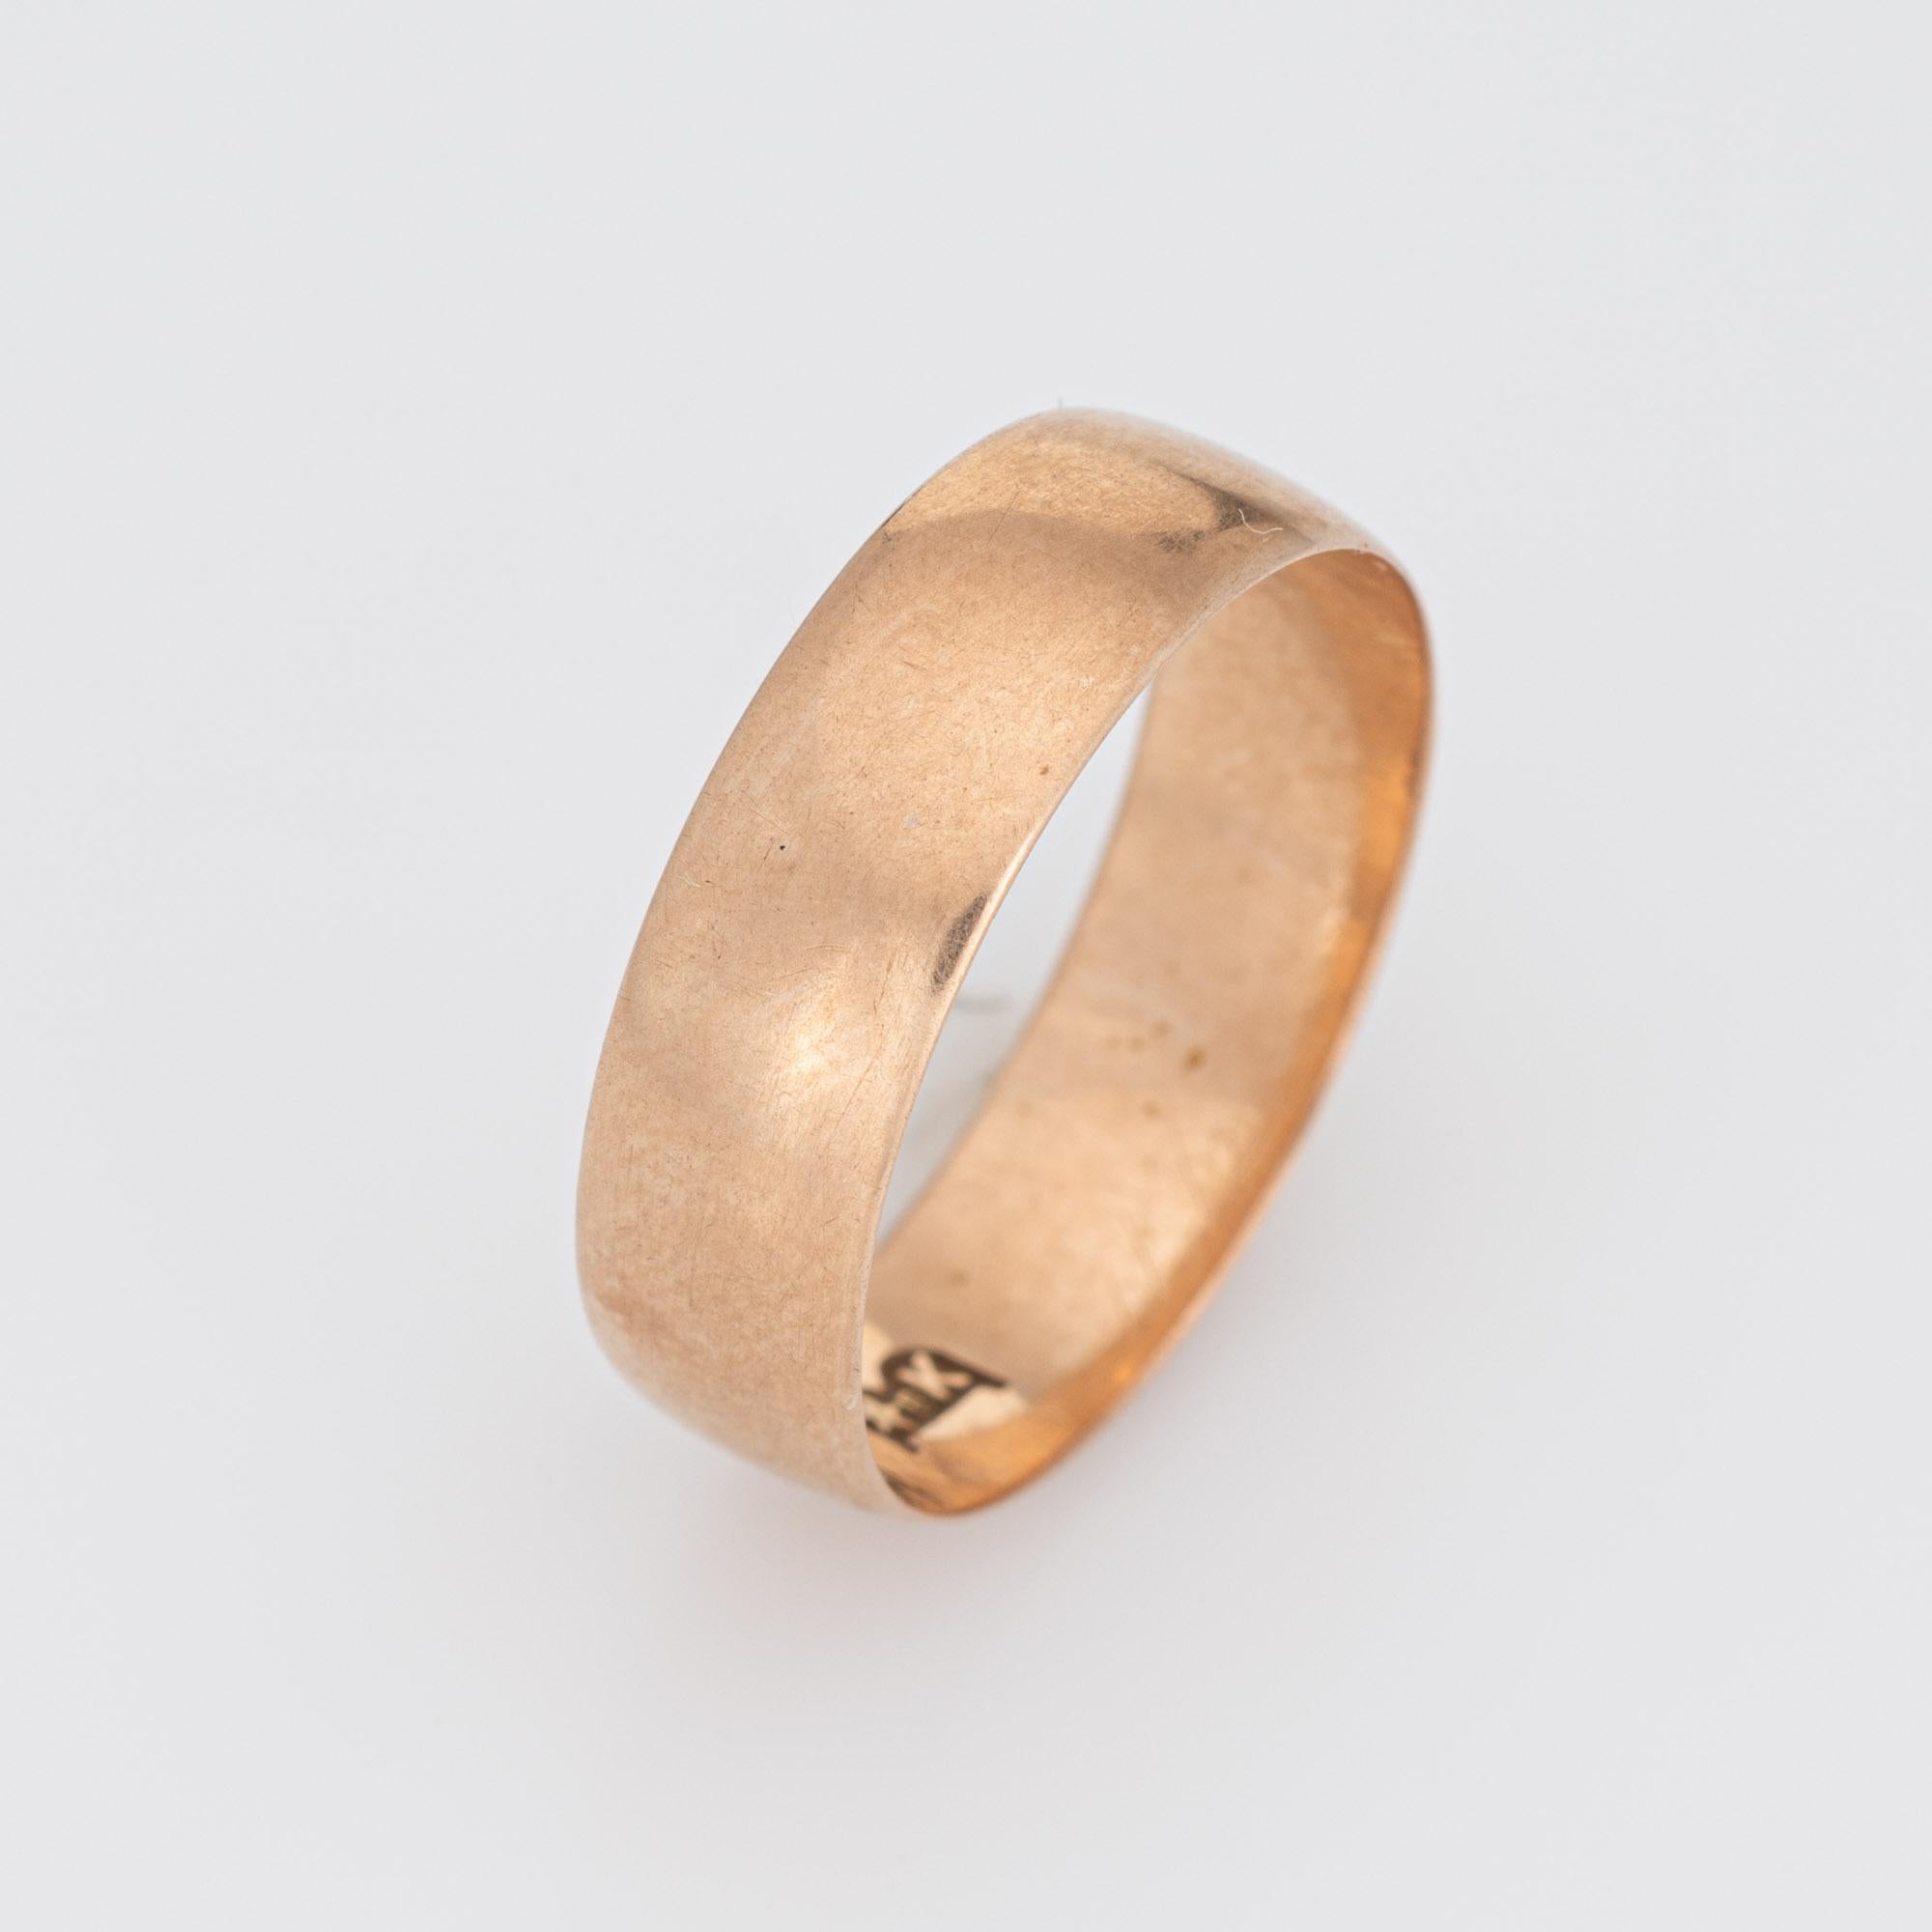 Elegant antique Victorian band (circa 1880s to 1900s) crafted in 10k rose gold. 

The ring epitomizes antique charm and would make a lovely wedding band. Also great worn alone or stacked with your jewelry from any era. The gold has a soft and supple